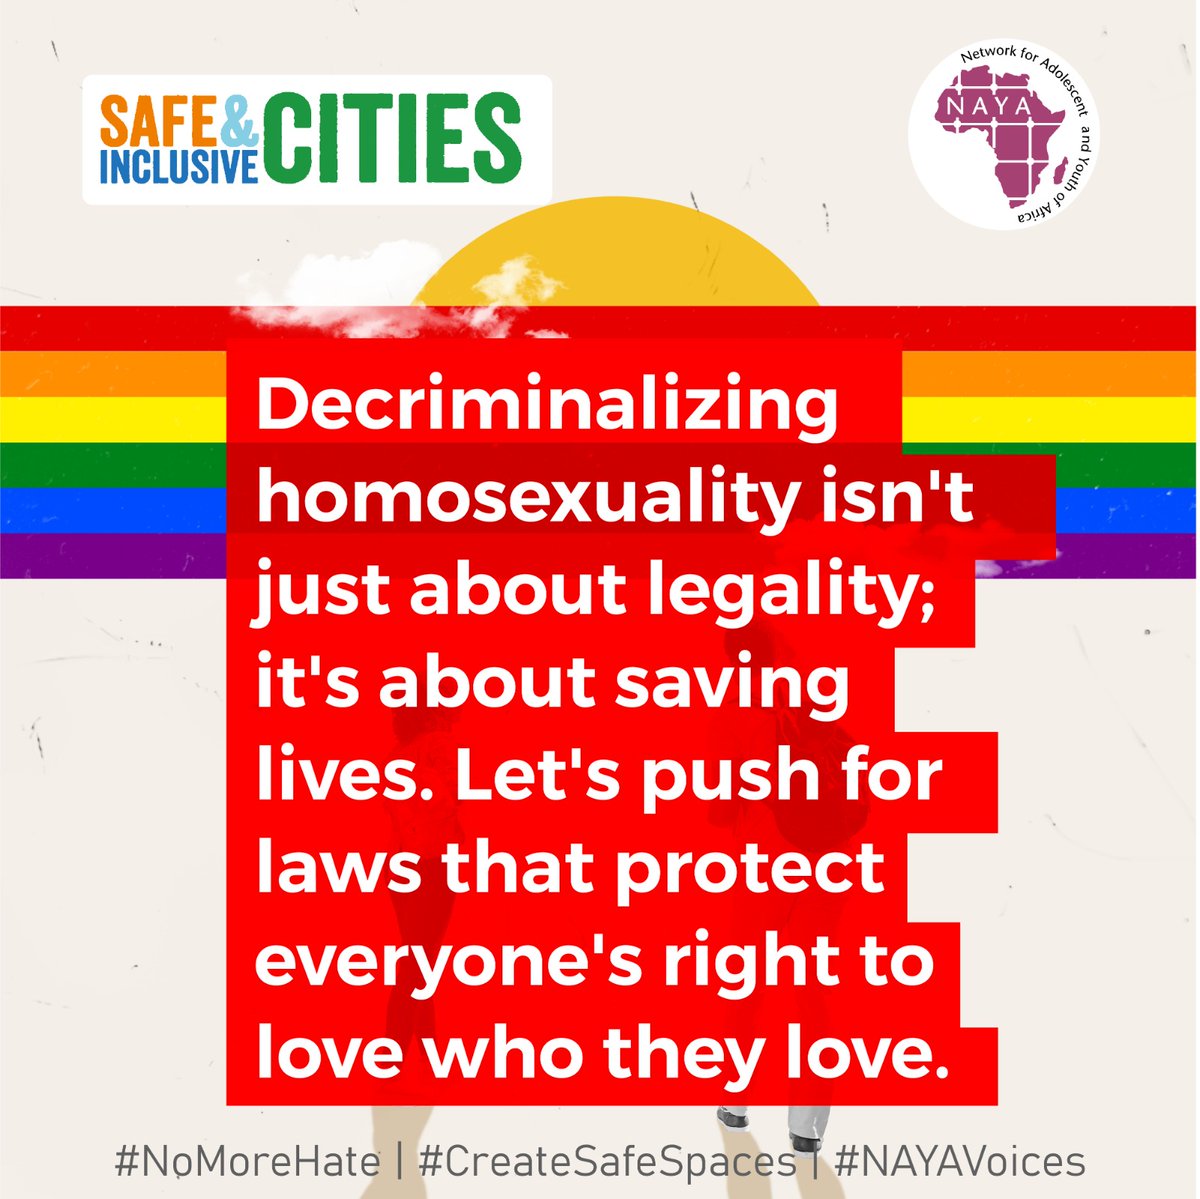 Love is love. It's time to decriminalize homosexuality and ensure that everyone has the right to love freely and without fear. #NoMoreHate #CreateSafeSpaces #NAYAVoices